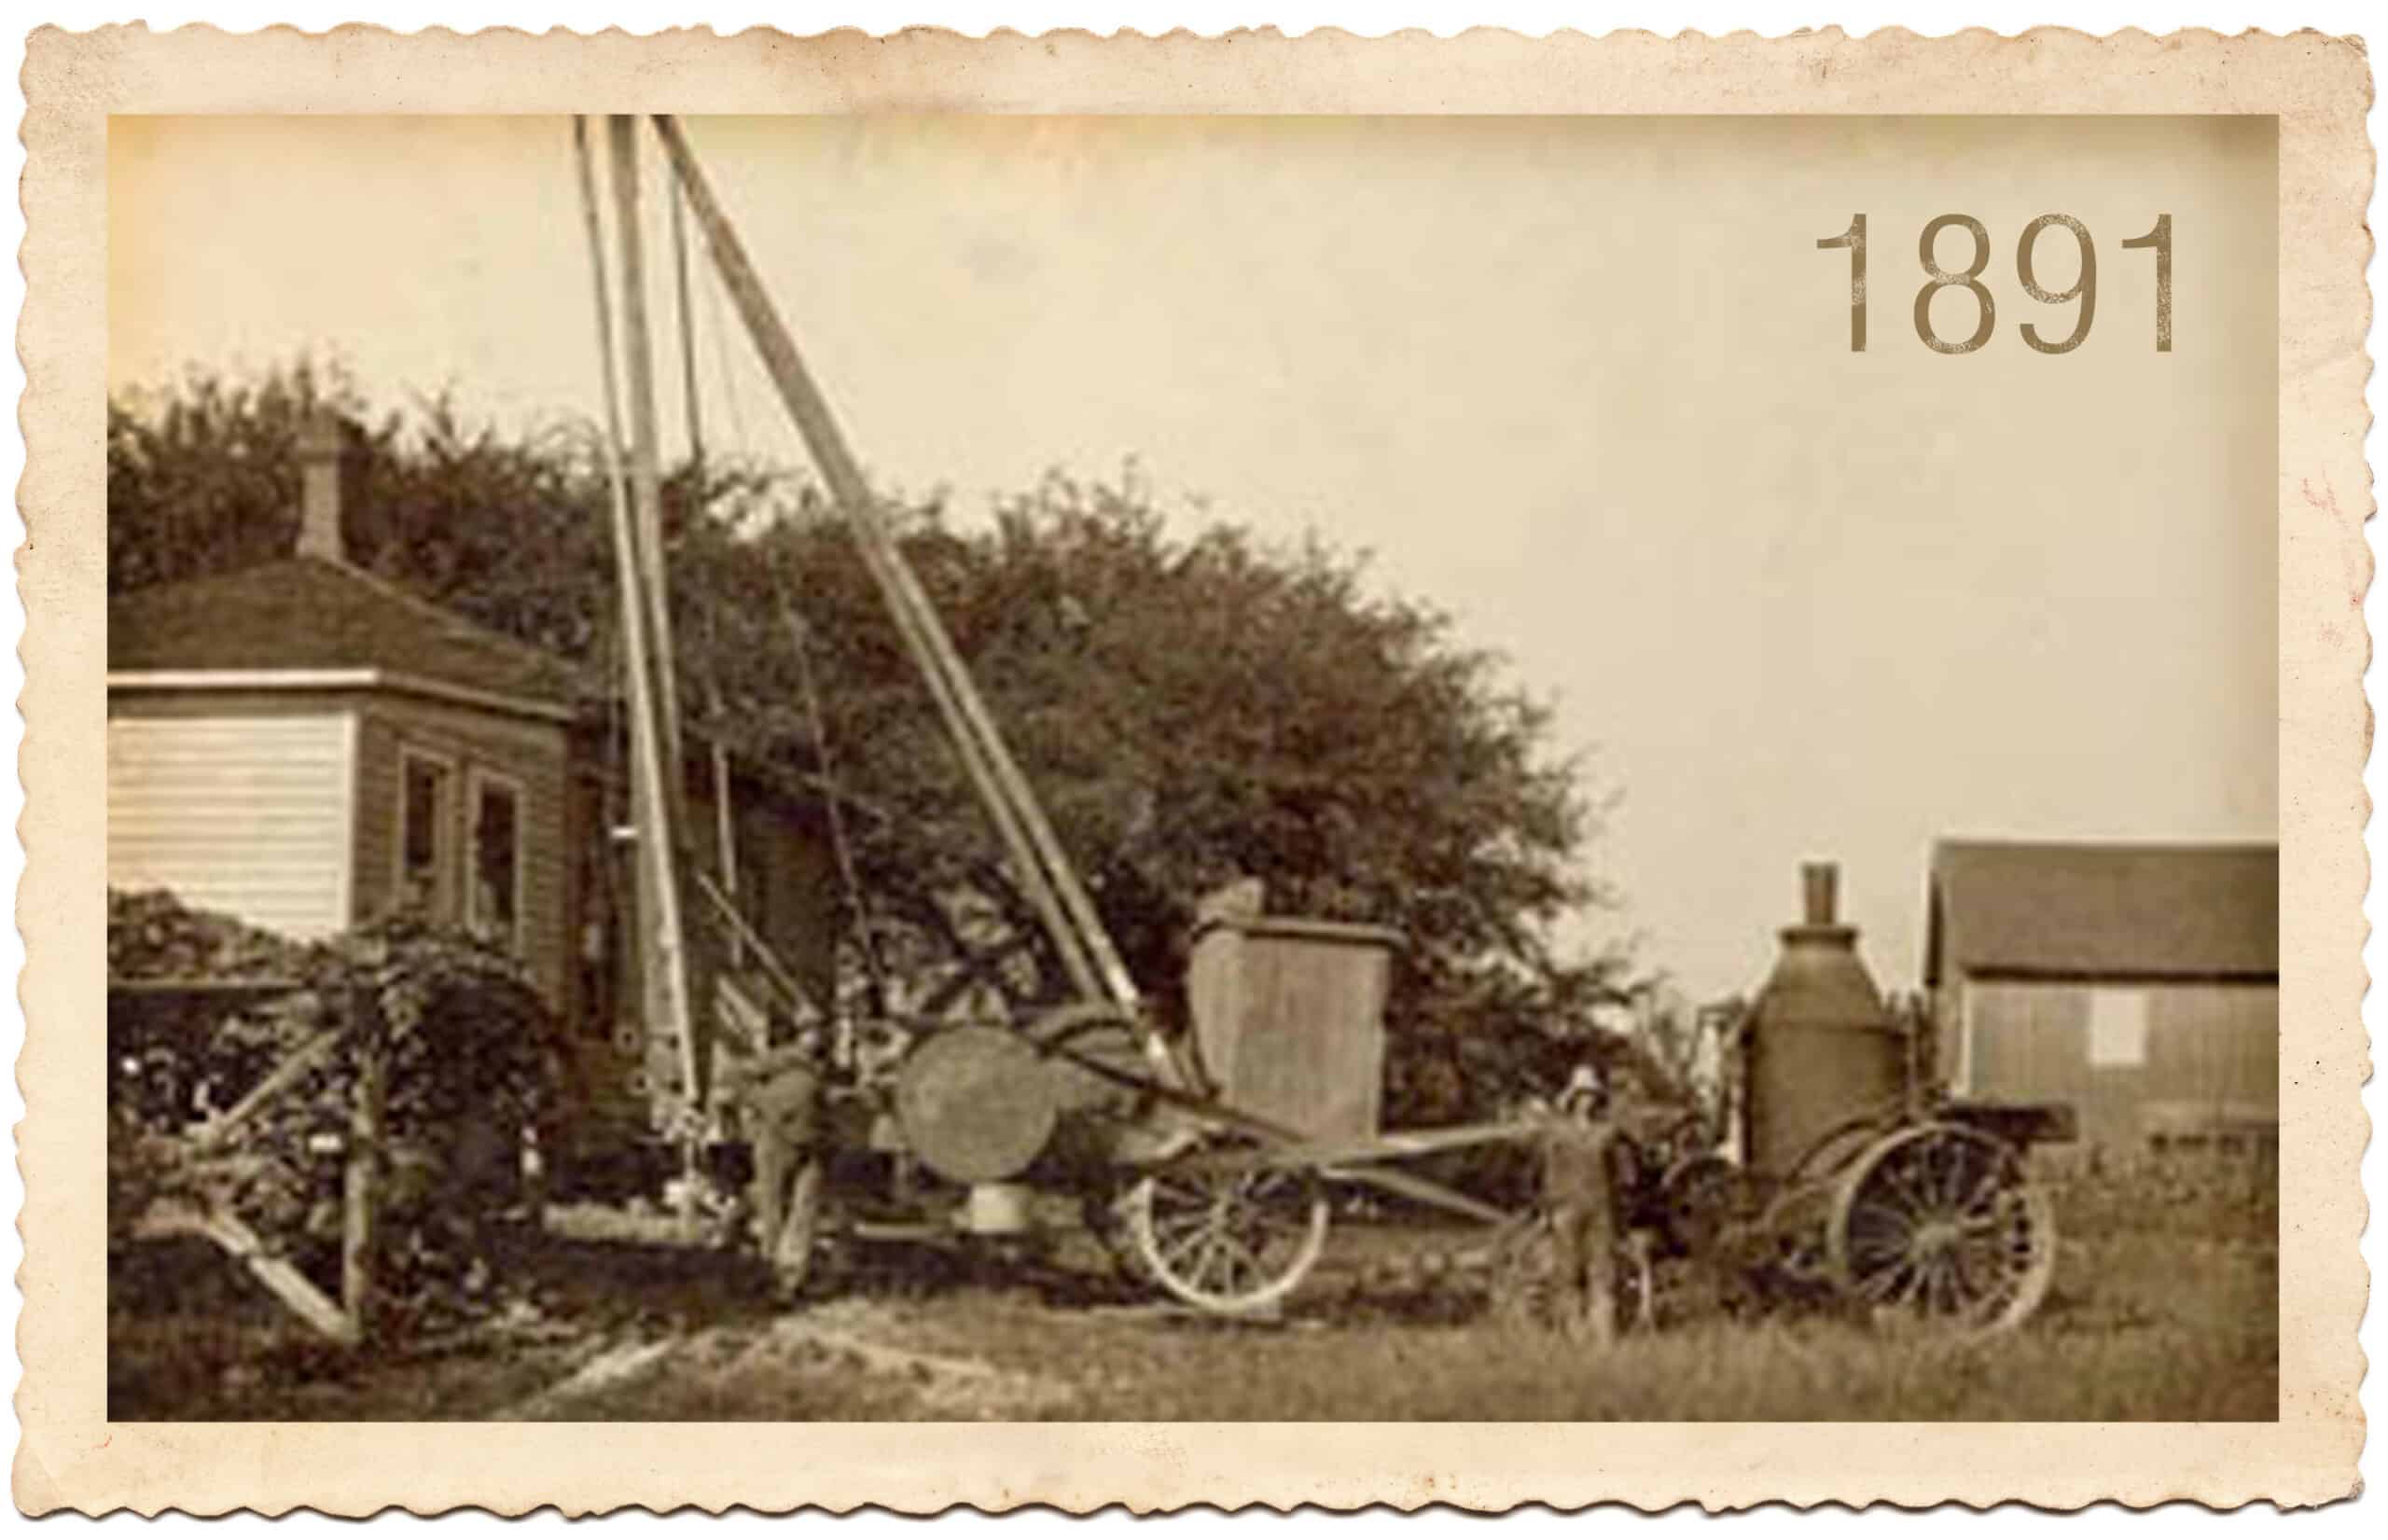 James Moody and Associates groundwater professionals since 1891 started with steam-driven drillings rigs in Crawford County, PA old sepia company photo stamp